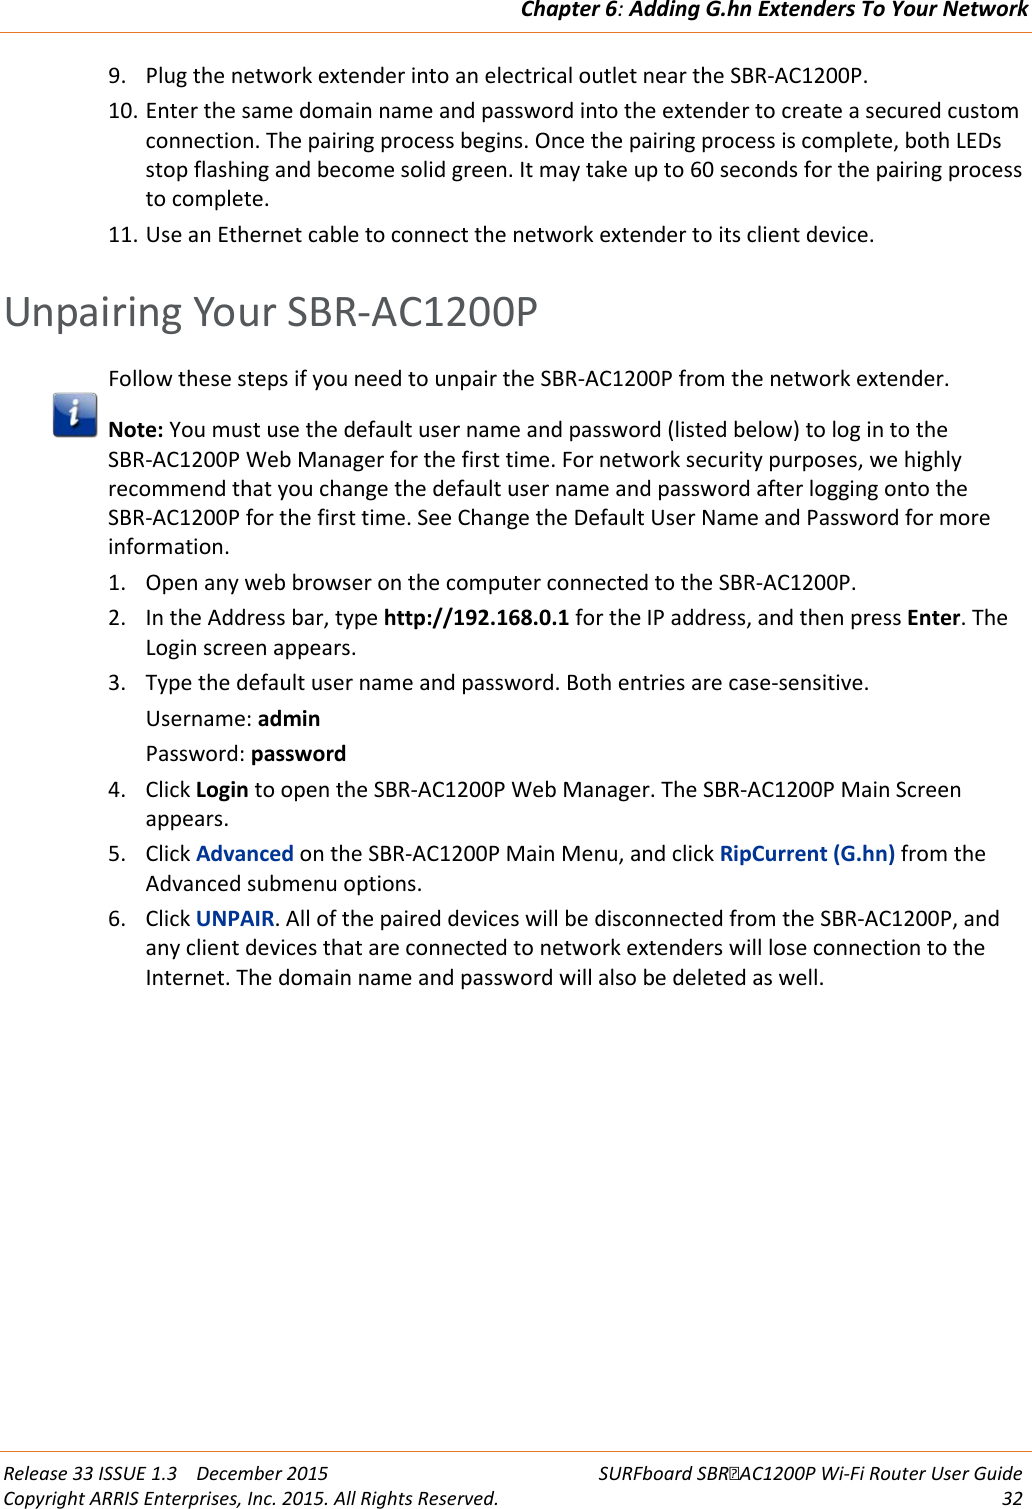 Chapter 6: Adding G.hn Extenders To Your Network  Release 33 ISSUE 1.3    December 2015 SURFboard SBRAC1200P Wi-Fi Router User Guide Copyright ARRIS Enterprises, Inc. 2015. All Rights Reserved. 32  9. Plug the network extender into an electrical outlet near the SBR-AC1200P. 10. Enter the same domain name and password into the extender to create a secured custom connection. The pairing process begins. Once the pairing process is complete, both LEDs stop flashing and become solid green. It may take up to 60 seconds for the pairing process to complete. 11. Use an Ethernet cable to connect the network extender to its client device.   Unpairing Your SBR-AC1200P Follow these steps if you need to unpair the SBR-AC1200P from the network extender.  Note: You must use the default user name and password (listed below) to log in to the SBR-AC1200P Web Manager for the first time. For network security purposes, we highly recommend that you change the default user name and password after logging onto the SBR-AC1200P for the first time. See Change the Default User Name and Password for more information. 1. Open any web browser on the computer connected to the SBR-AC1200P. 2. In the Address bar, type http://192.168.0.1 for the IP address, and then press Enter. The Login screen appears. 3. Type the default user name and password. Both entries are case-sensitive. Username: admin Password: password 4. Click Login to open the SBR-AC1200P Web Manager. The SBR-AC1200P Main Screen appears. 5. Click Advanced on the SBR-AC1200P Main Menu, and click RipCurrent (G.hn) from the Advanced submenu options. 6. Click UNPAIR. All of the paired devices will be disconnected from the SBR-AC1200P, and any client devices that are connected to network extenders will lose connection to the Internet. The domain name and password will also be deleted as well.  